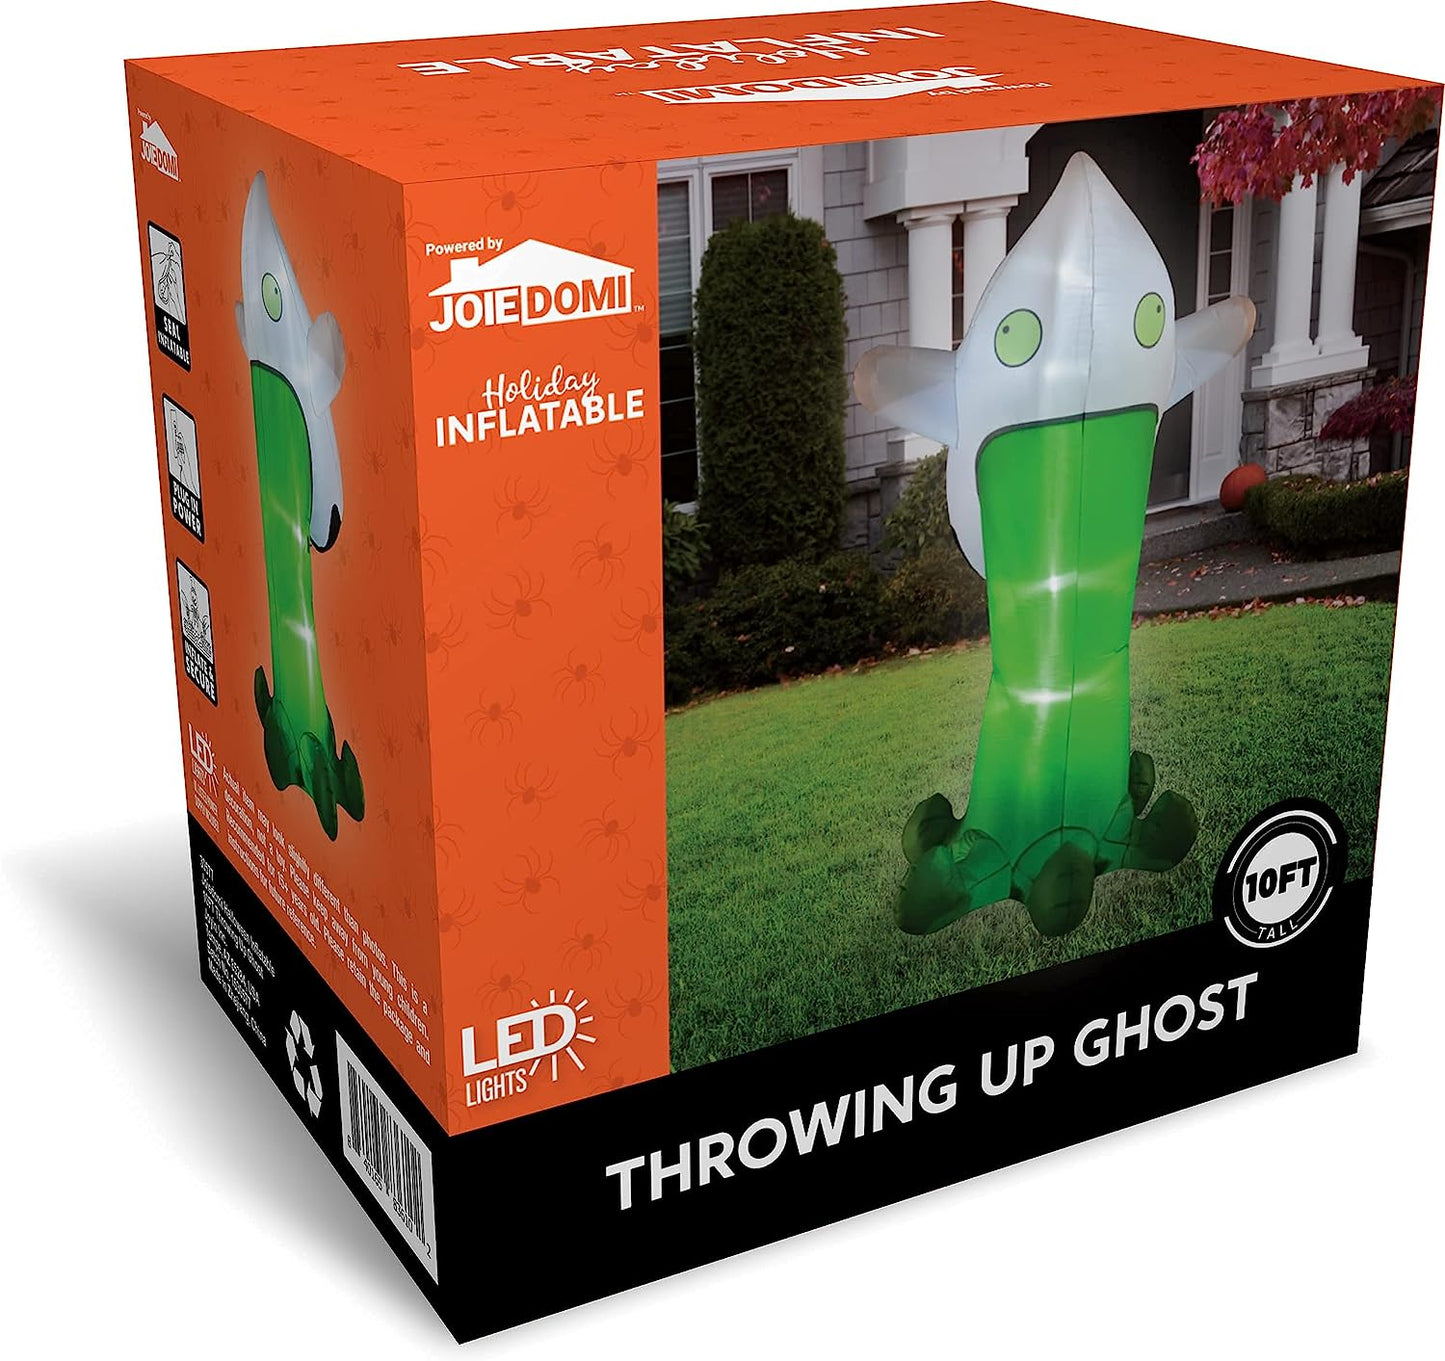 10 FT Tall Halloween Inflatable Throwing Up Ghost